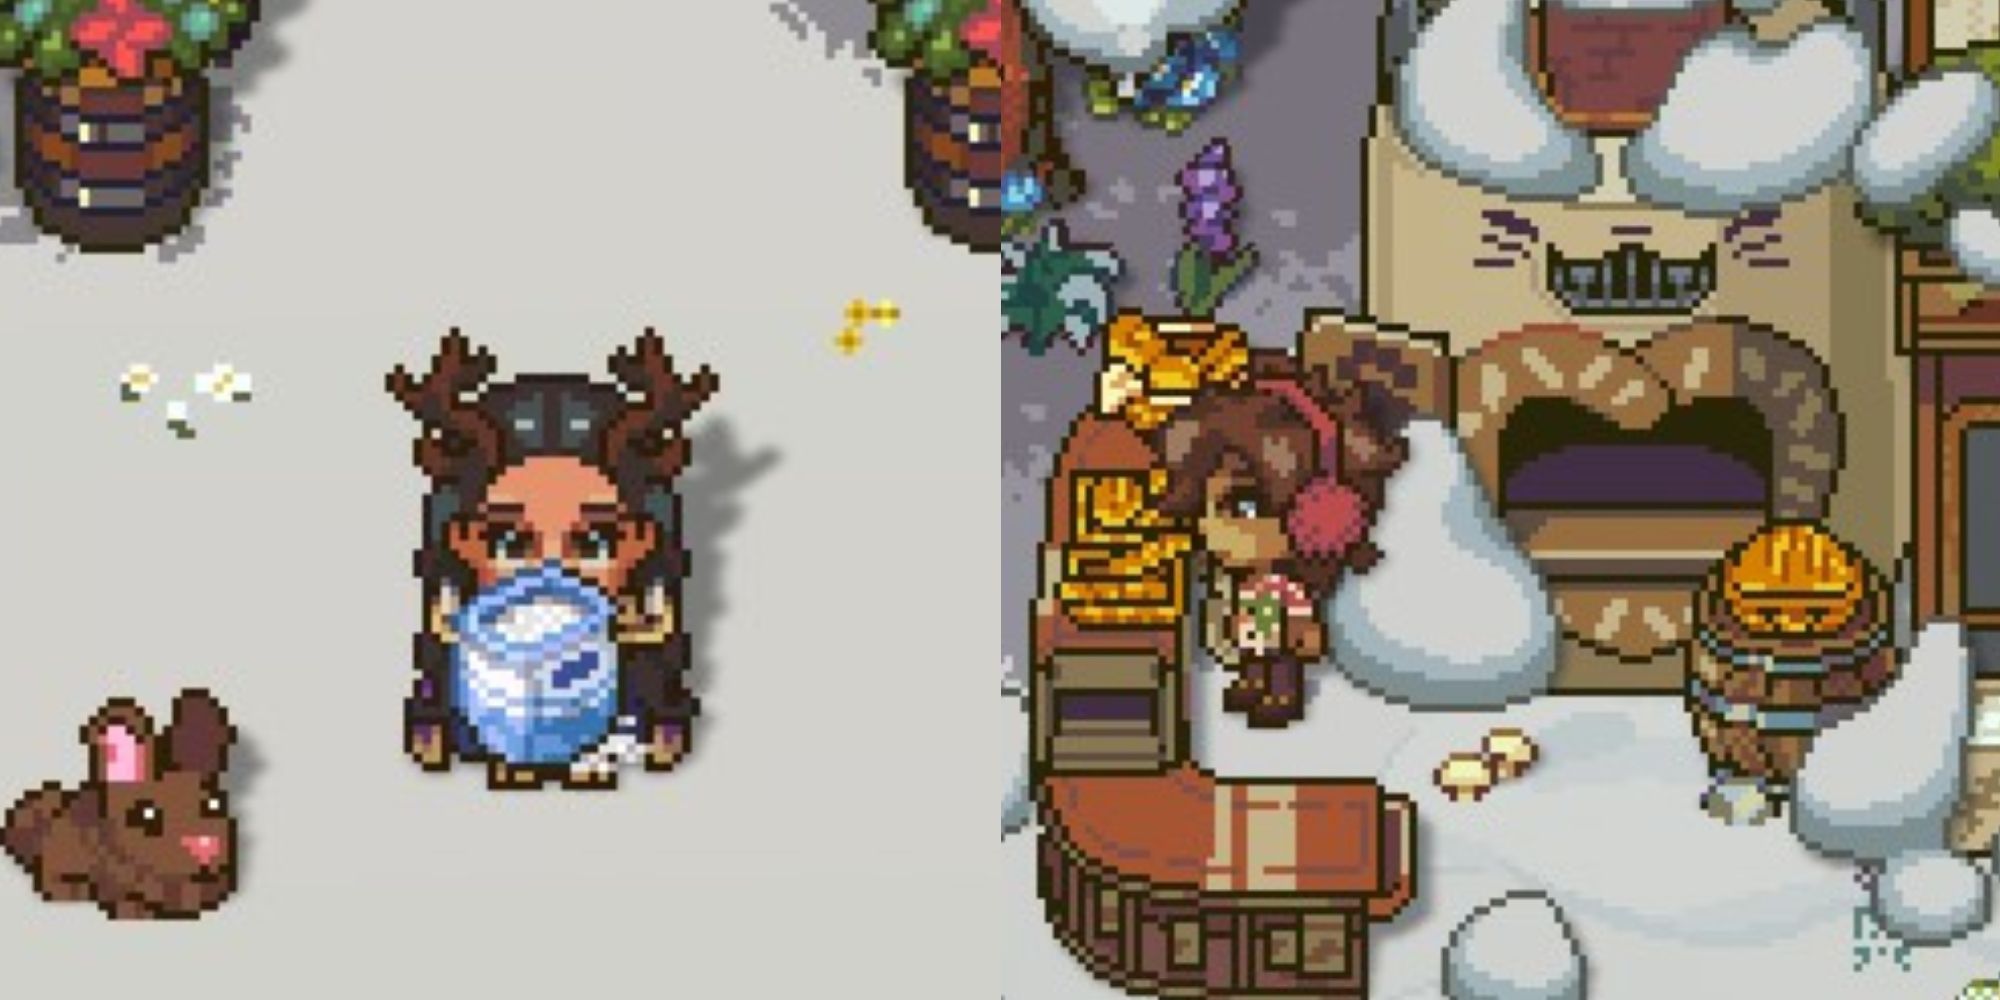 sun haven player holding sugar with brown bunny pet and liam in winter clothes at bakery